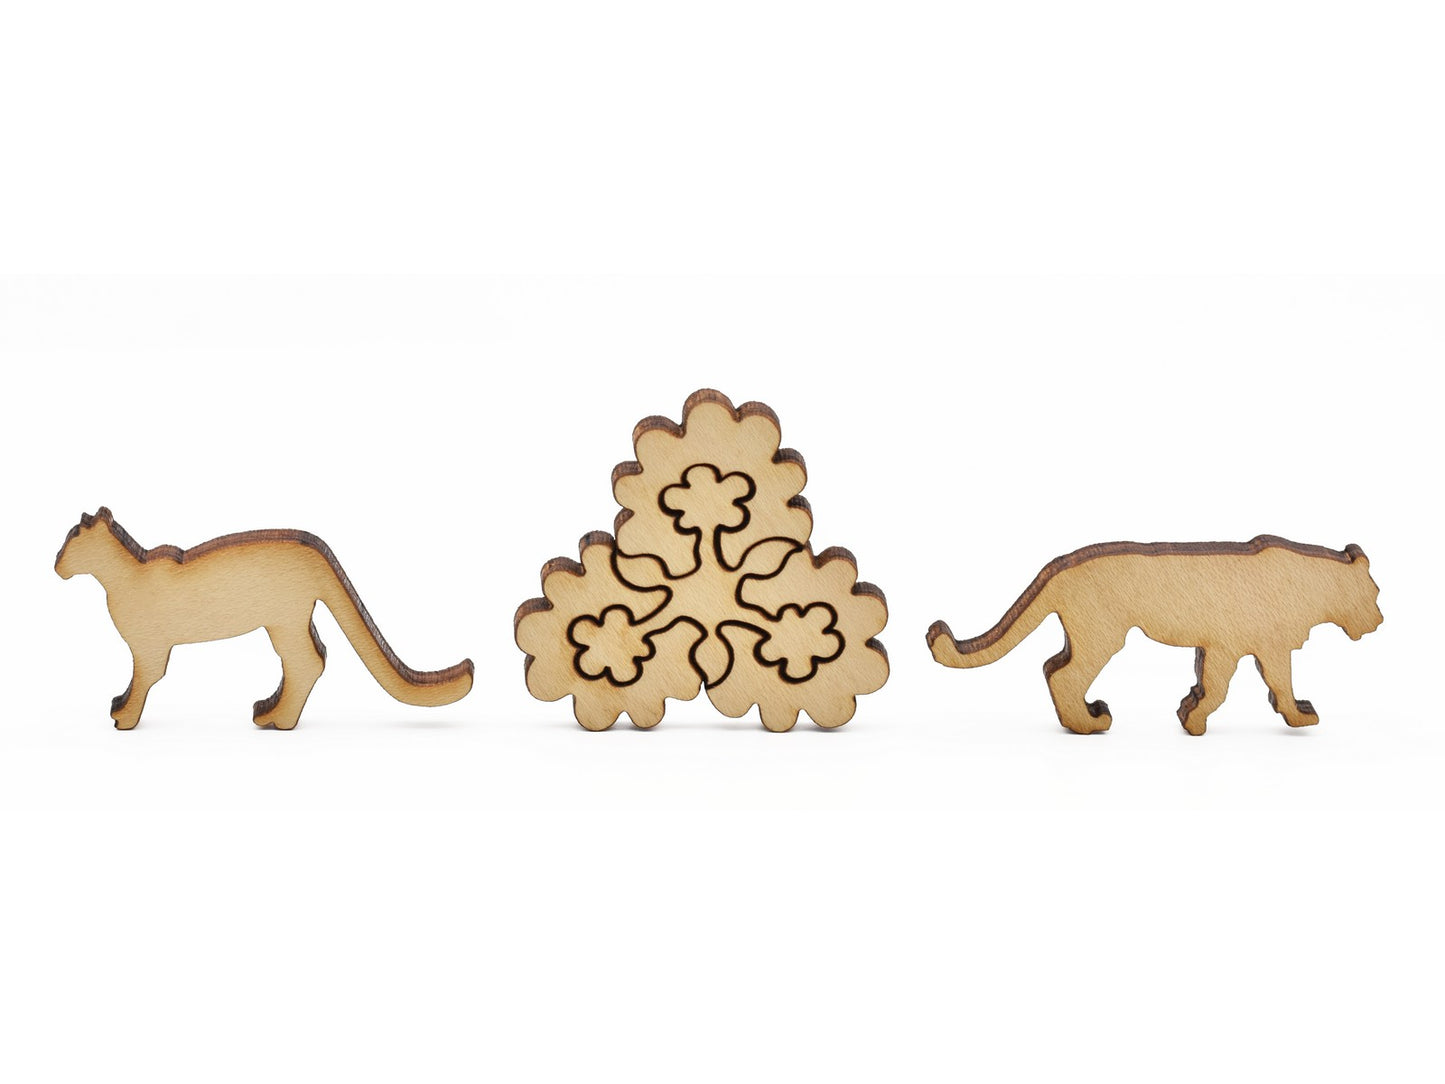 A closeup of pieces in the shape of flowers and jaguars.